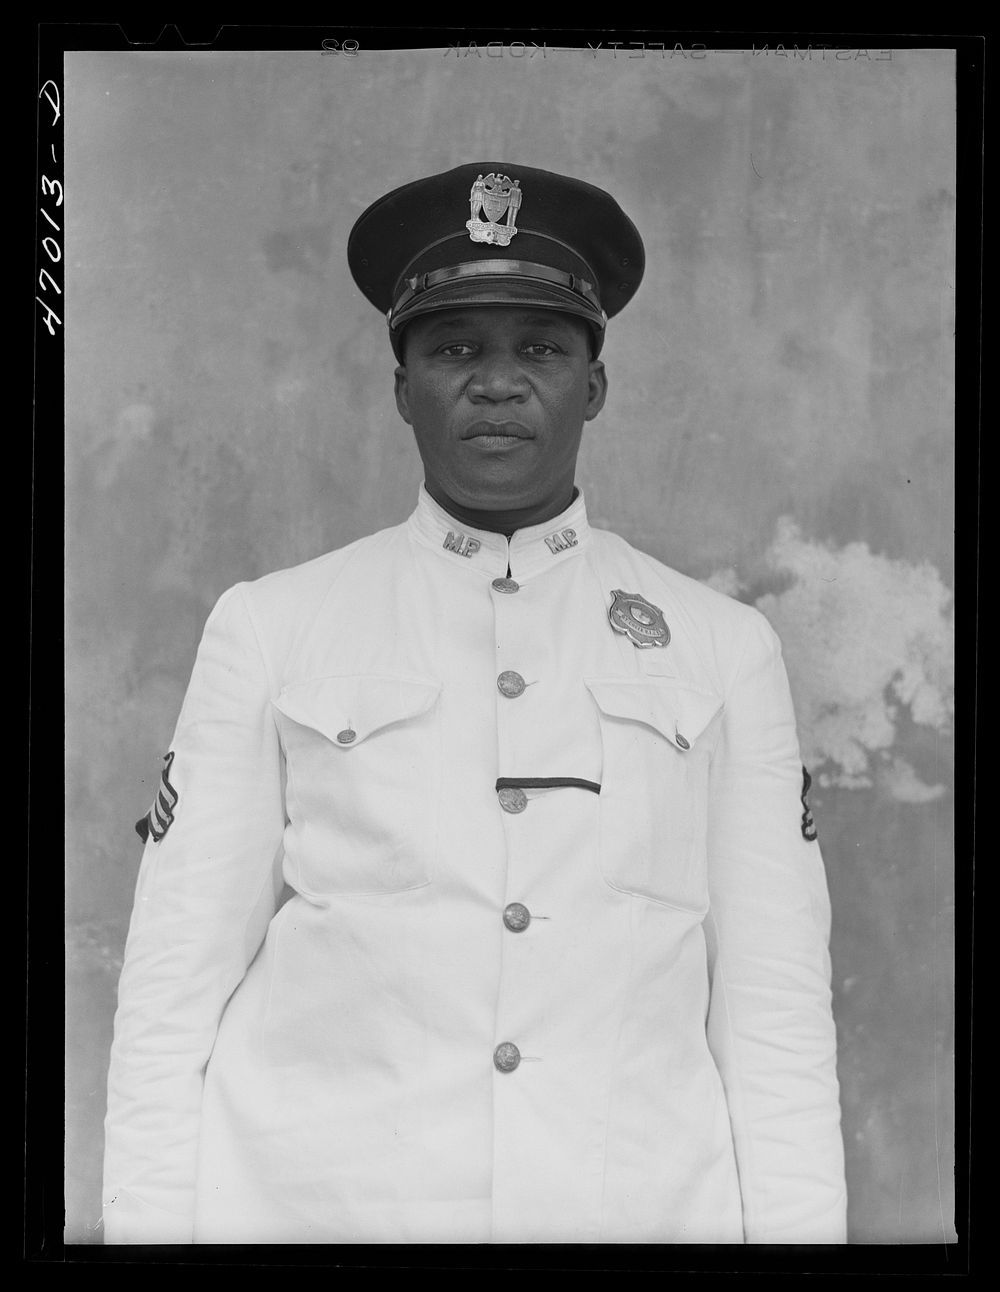 [Untitled photo, possibly related to: Frederiksted, Saint Croix, Virgin Islands. Sergeant of the police]. Sourced from the…